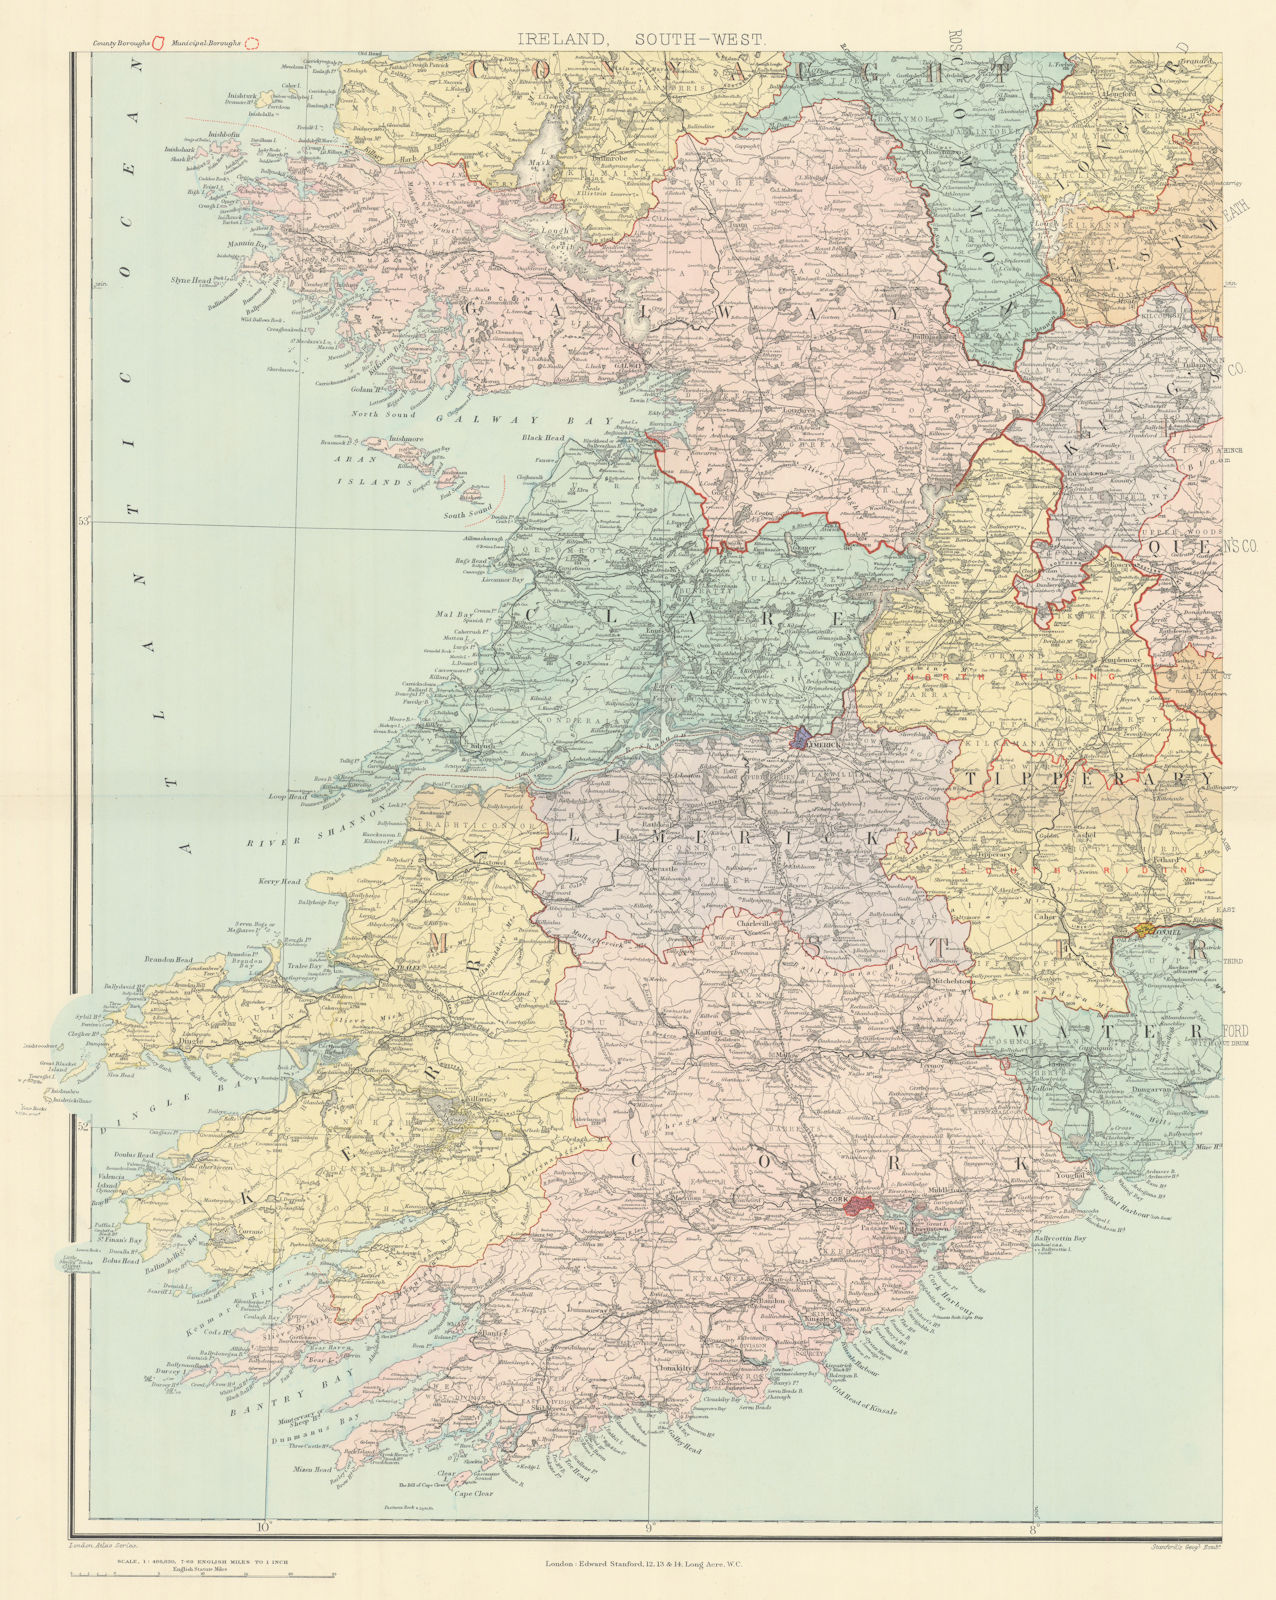 Associate Product Ireland south-west Munster Kerry Limerick Cork Clare Limerick. STANFORD 1904 map